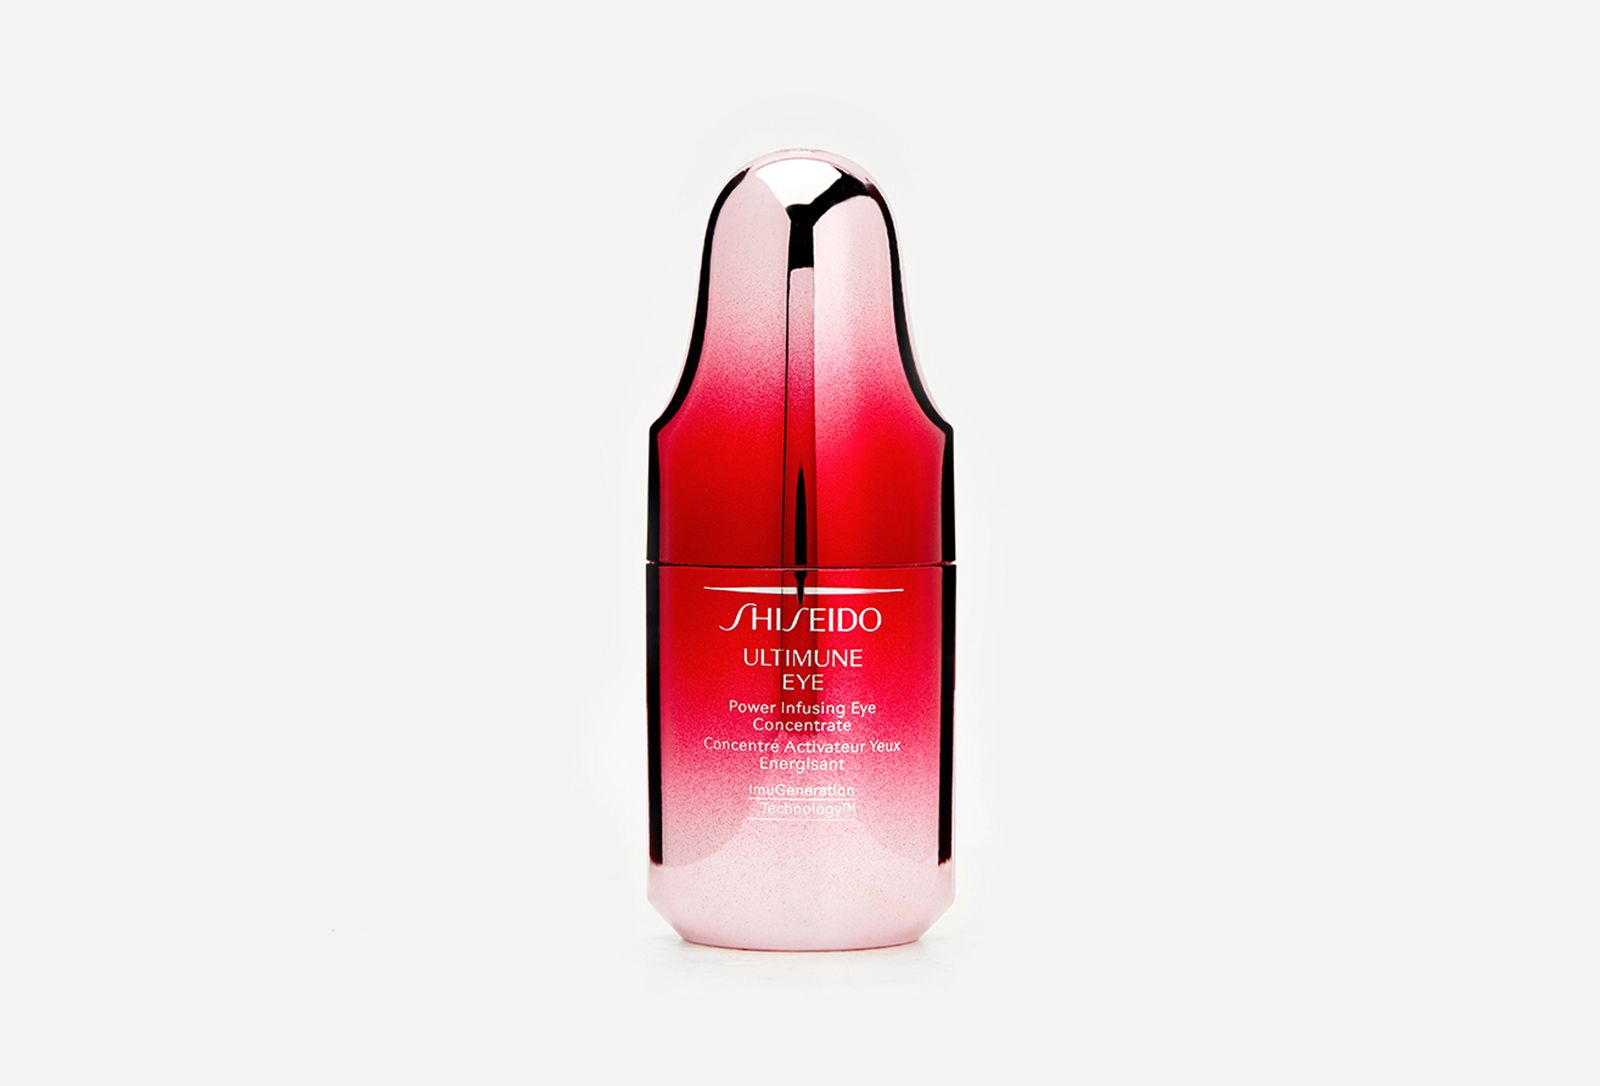 Shiseido power infusing concentrate. Ultimune концентрат шисейдо Power infusing. Концентрат Shiseido Ultimune Power infusing Concentrate. Shiseido Ultimate Power infusing. Shiseido Ultimate Serum.